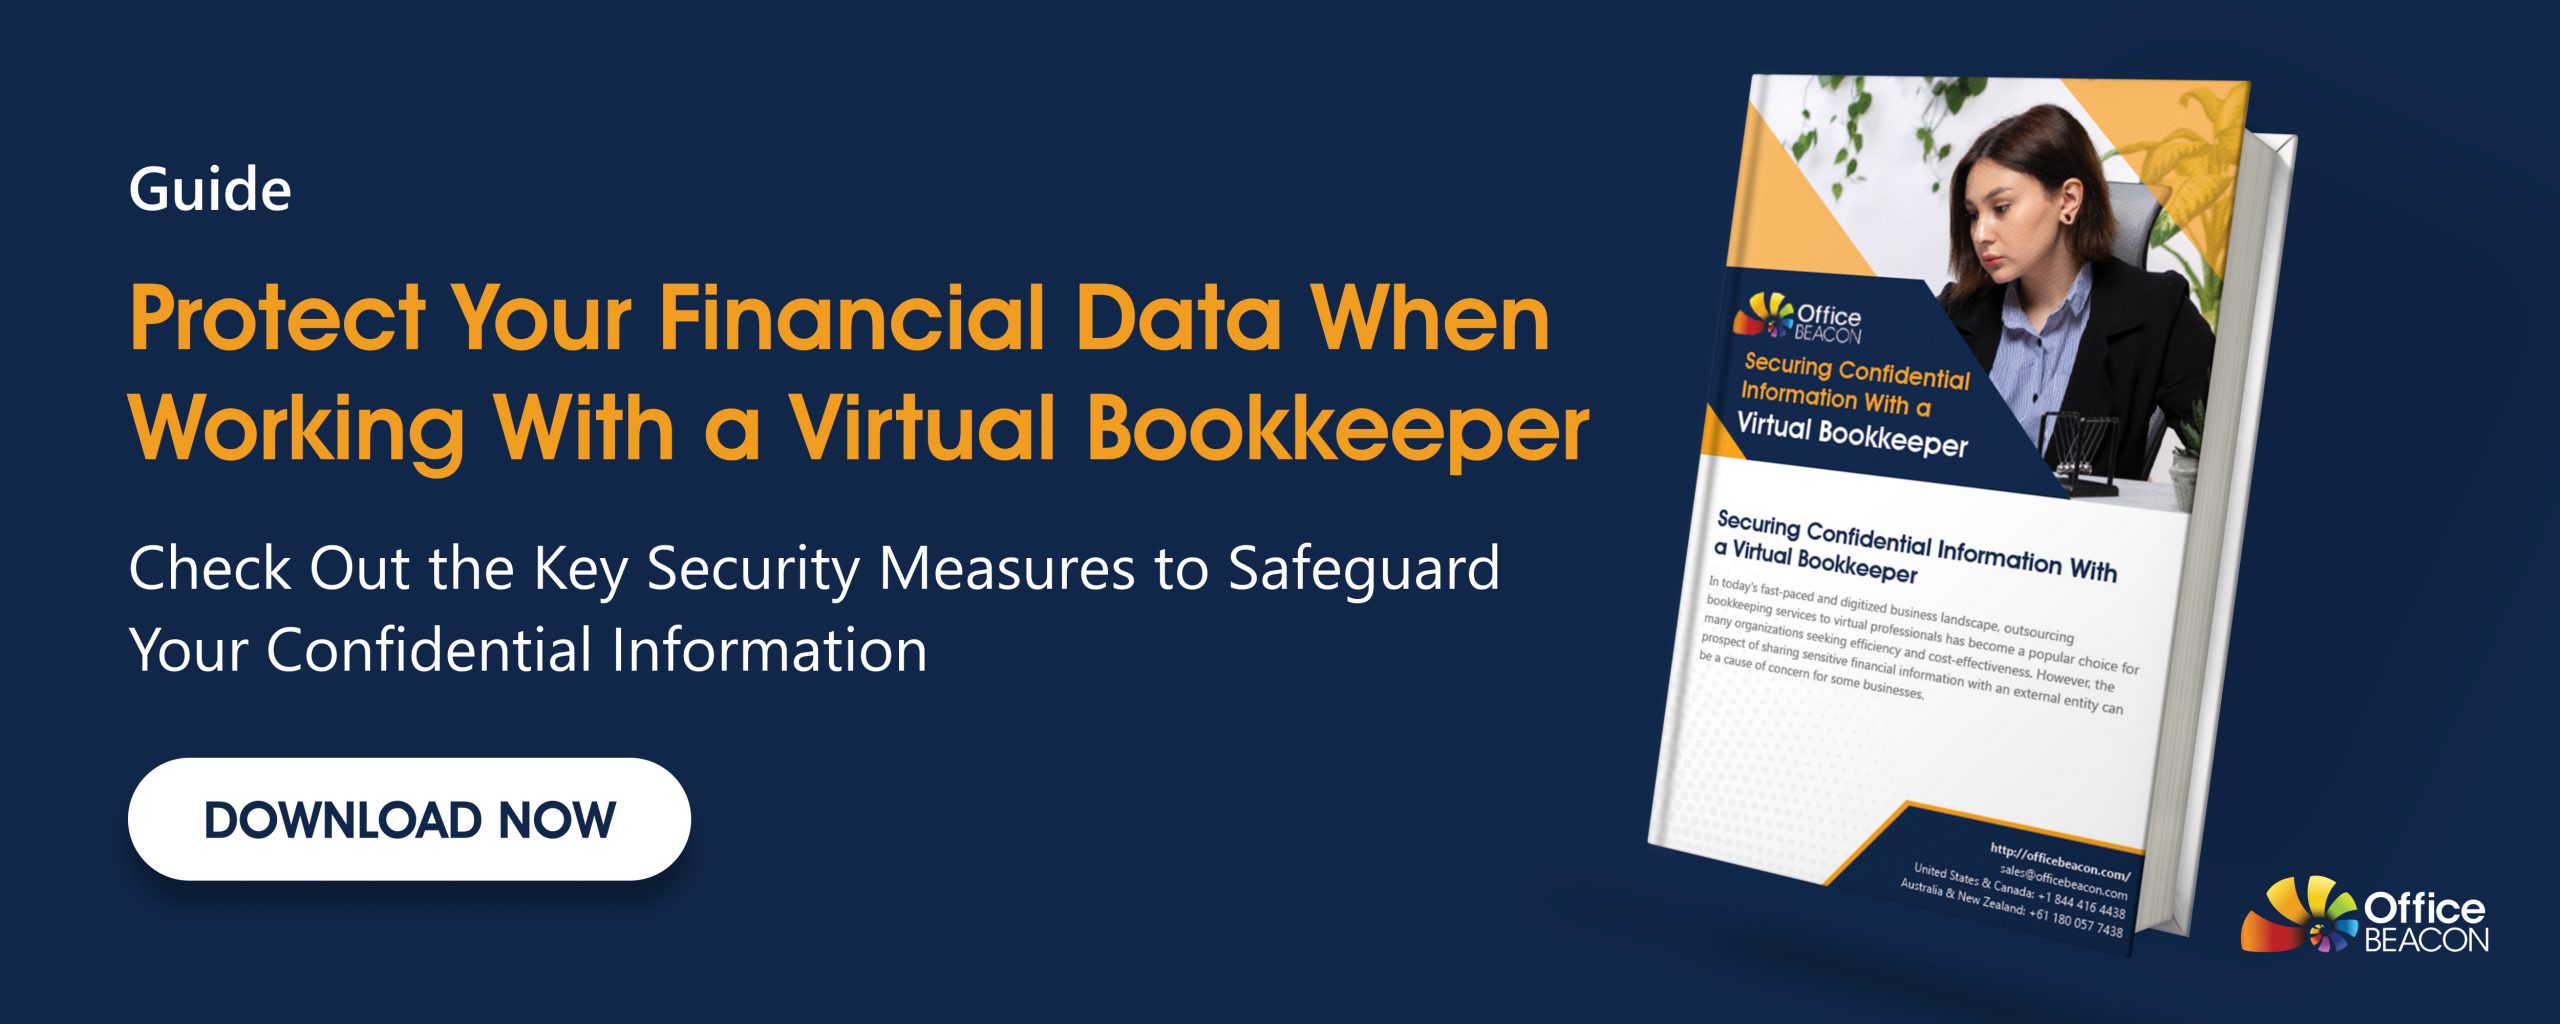 Securing Confidential Information With a Virtual Bookkeeper